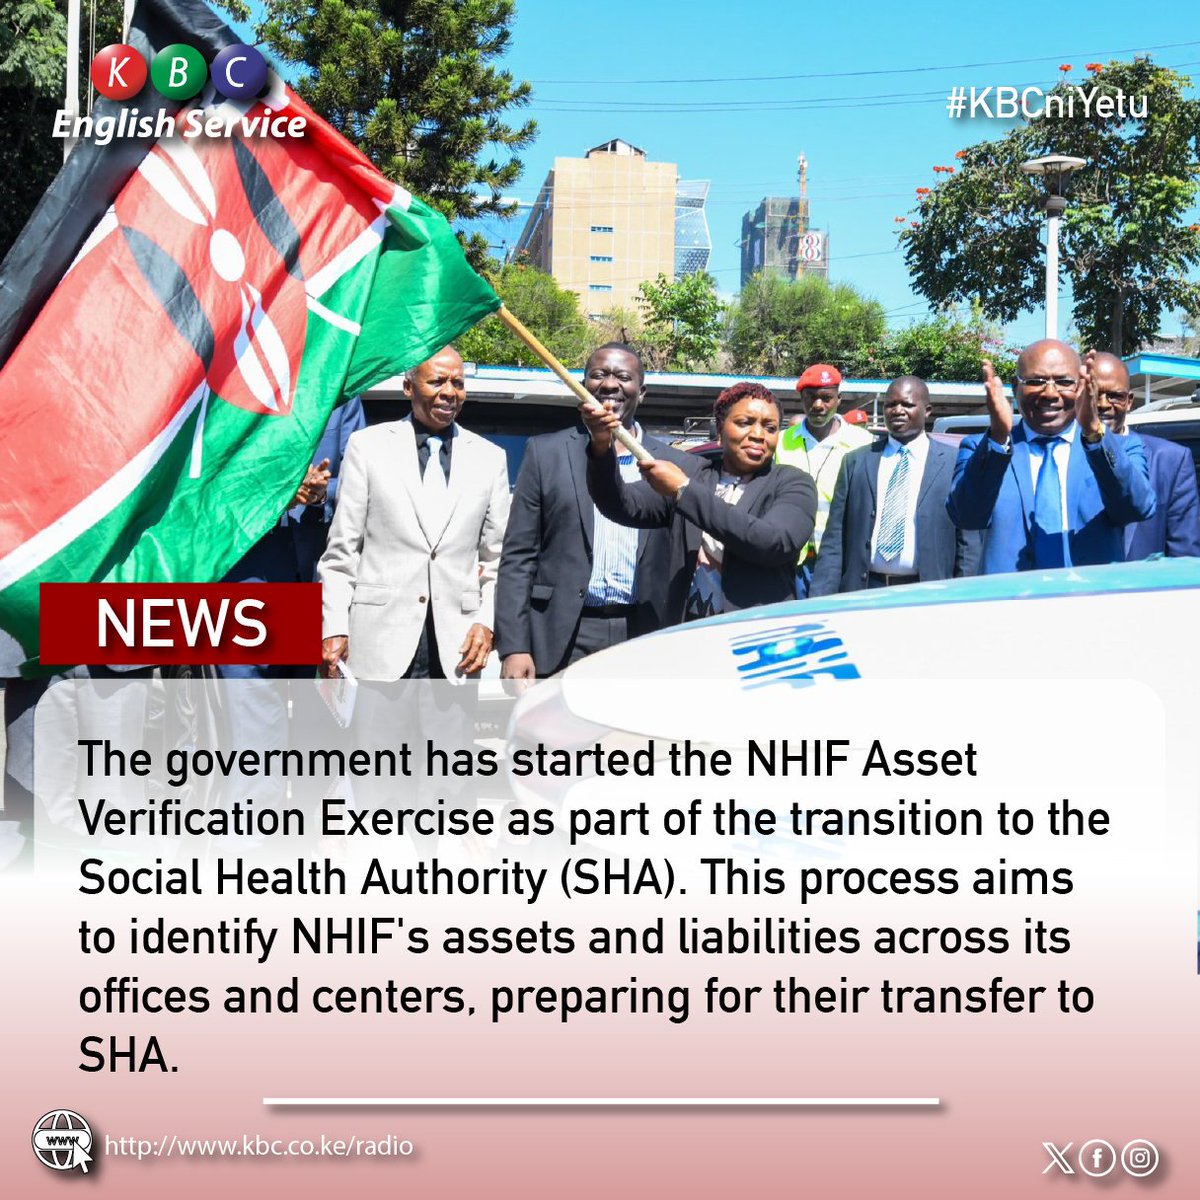 The government has started the NHIF Asset Verification Exercise as part of the transition to the Social Health Authority (SHA). This process aims to identify NHIF's assets and liabilities across its offices and centers, preparing for their transfer to SHA ^PMN #KBCEnglishService